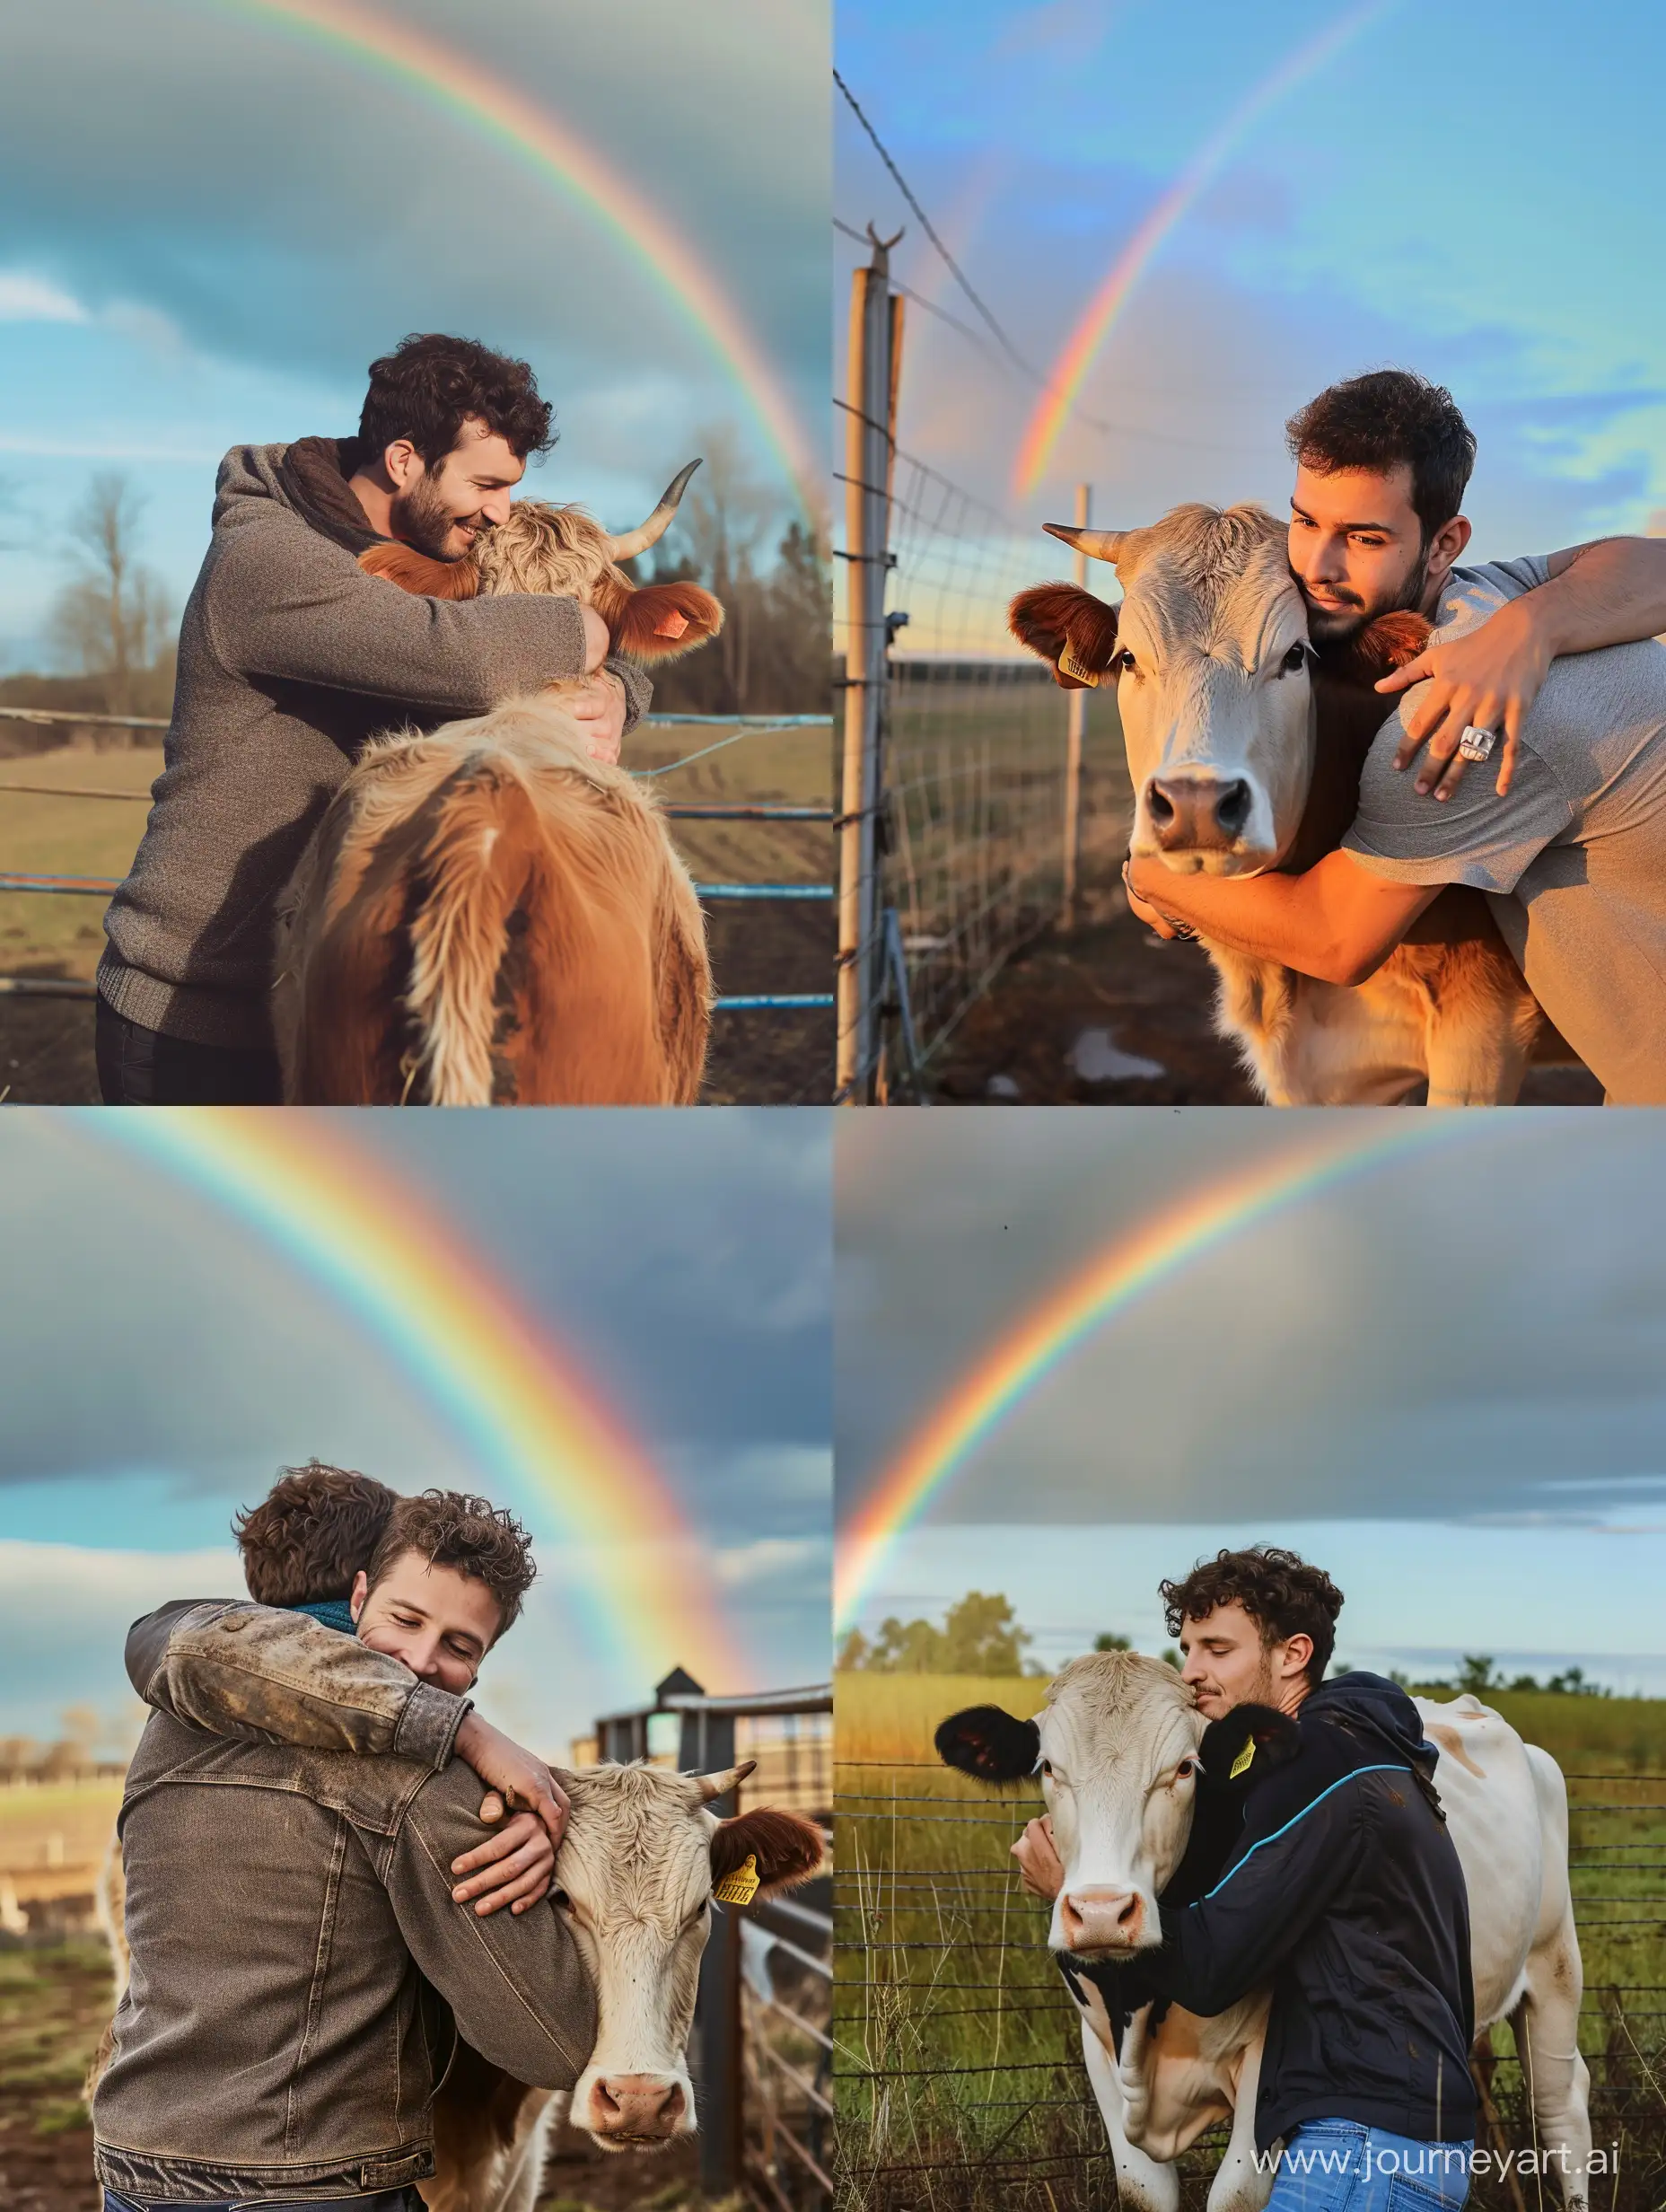 An attractive man hugging a cow, rainbow in the sky